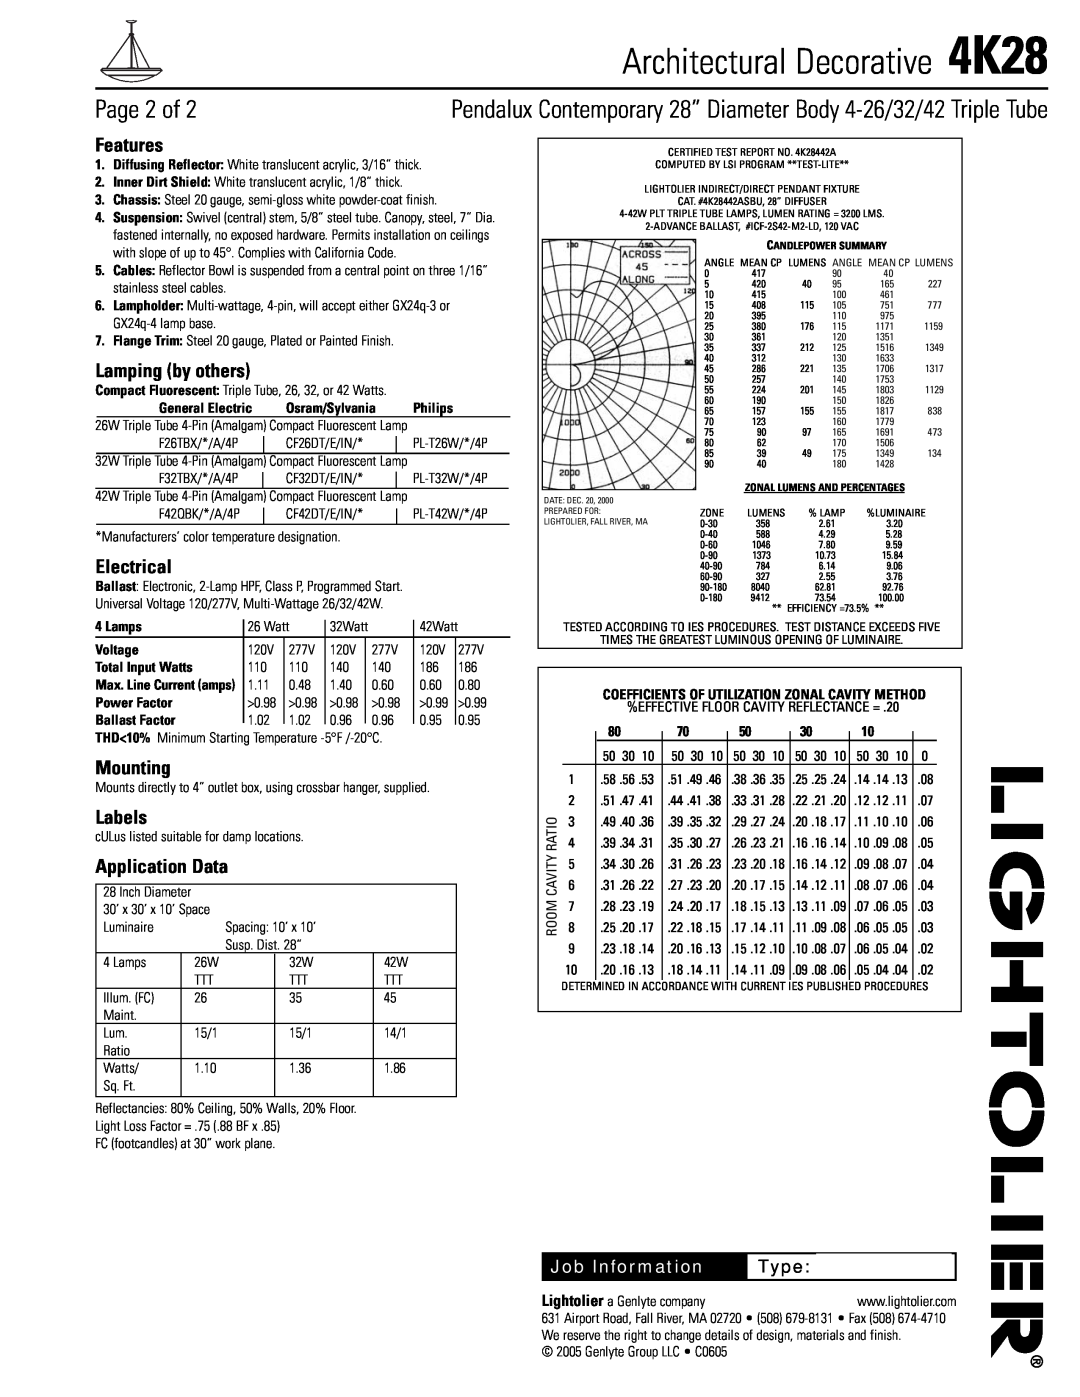 Lightolier 4K28 Page 2 of, Features, Lamping by others, Electrical, Mounting, Labels, Application Data, Job Information 